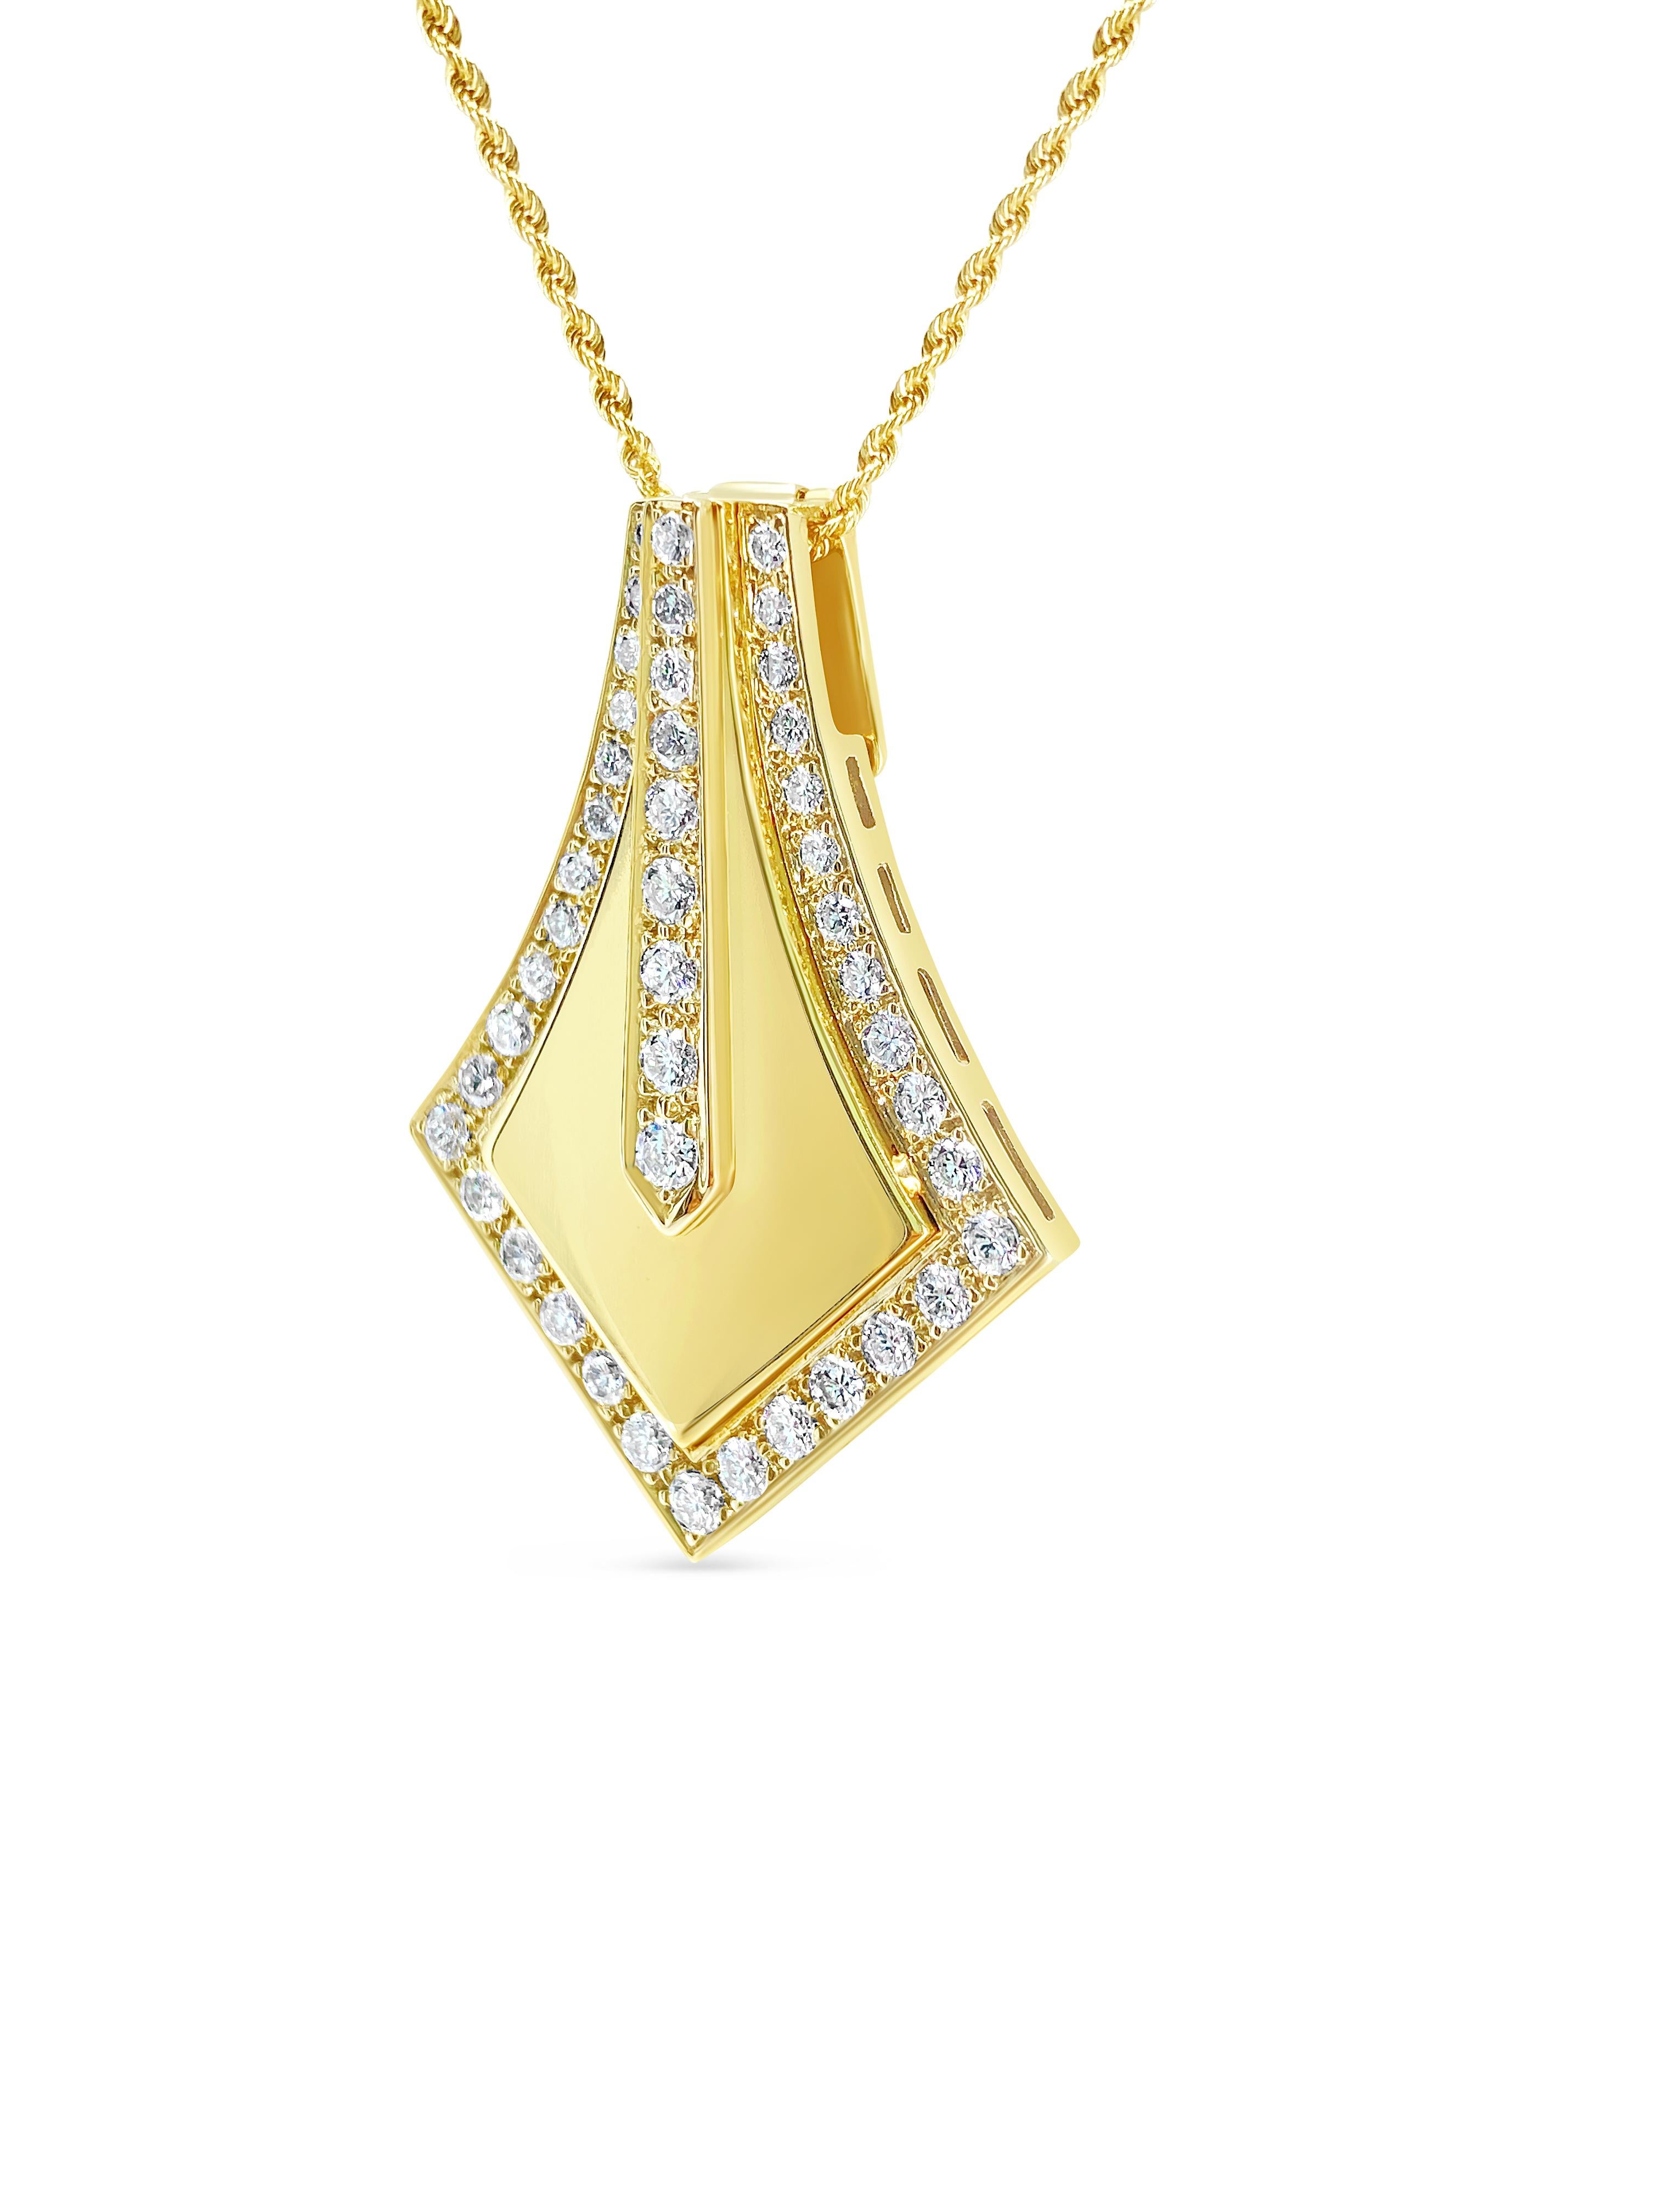 This pendant is made of 14-karat yellow gold. The diamond in it weighs a total of 3.04 carats, has VS clarity, and falls within the F-G color range. The diamonds are 100% natural and mined from the earth. The pendant's total weight is 11.07 grams,